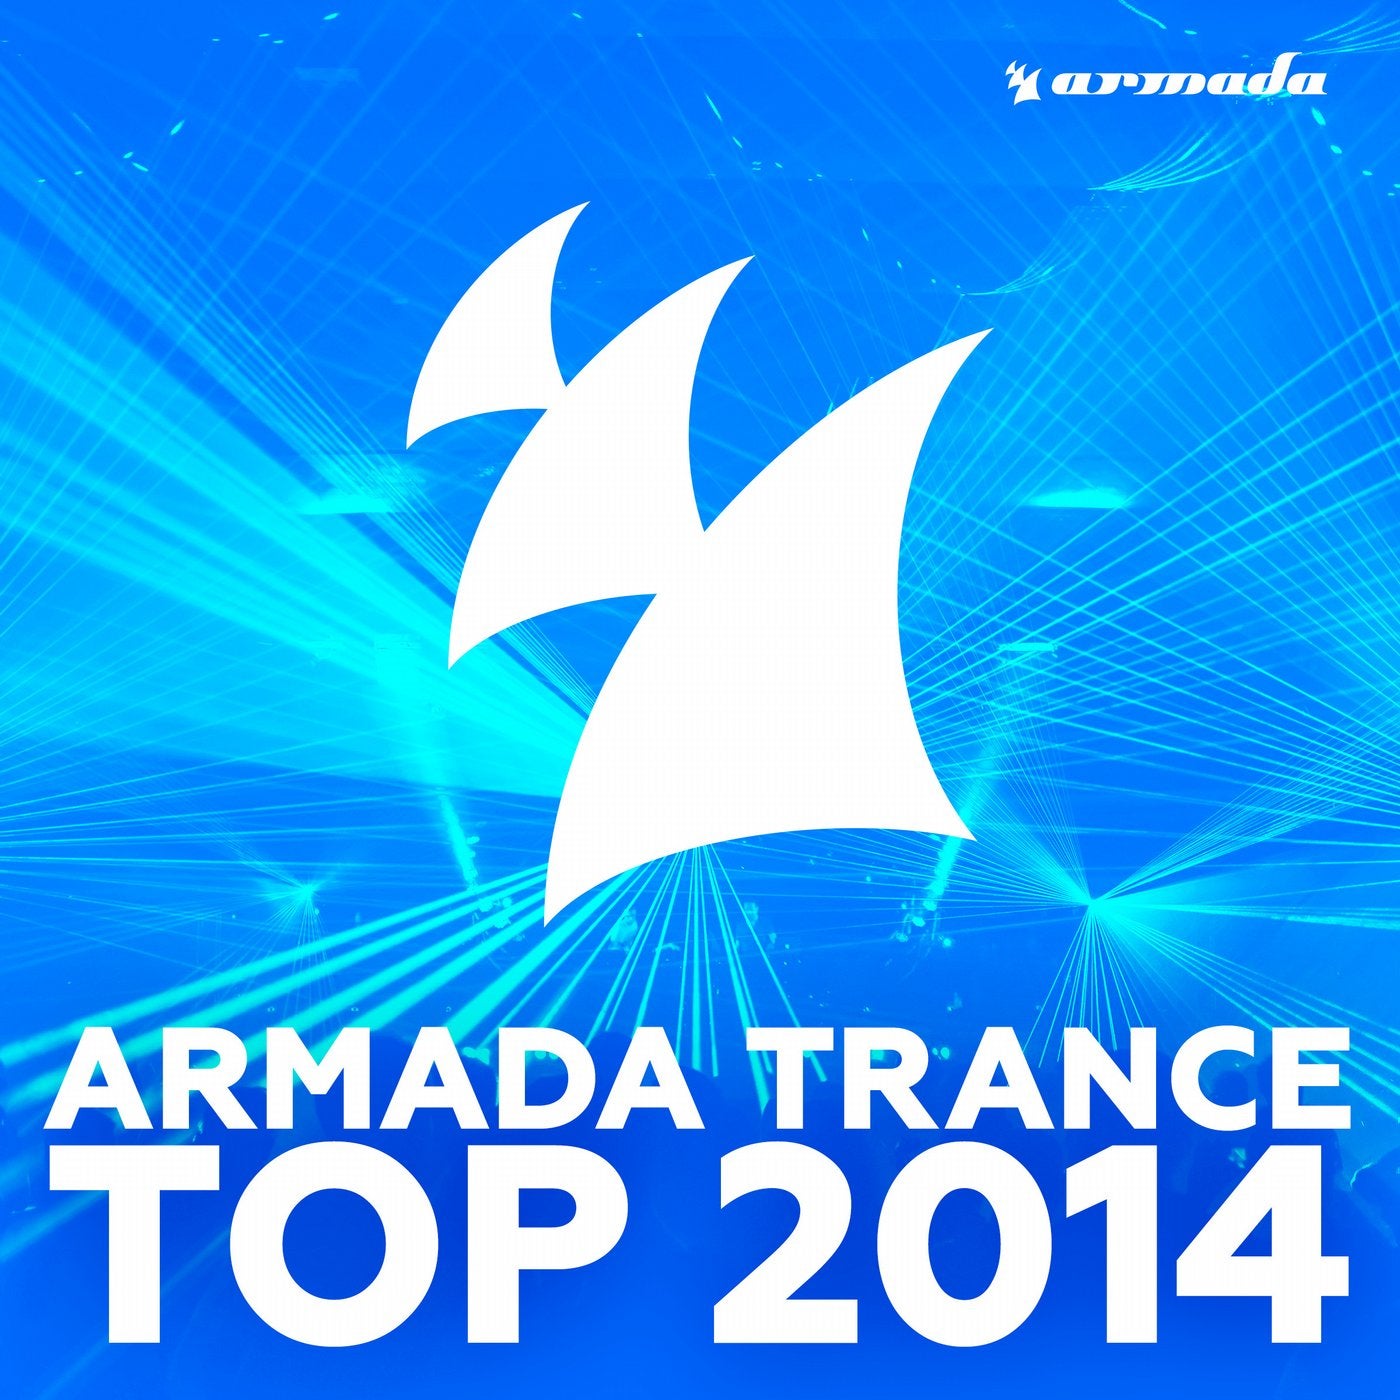 Armada Trance Top 2014 - Extended Versions